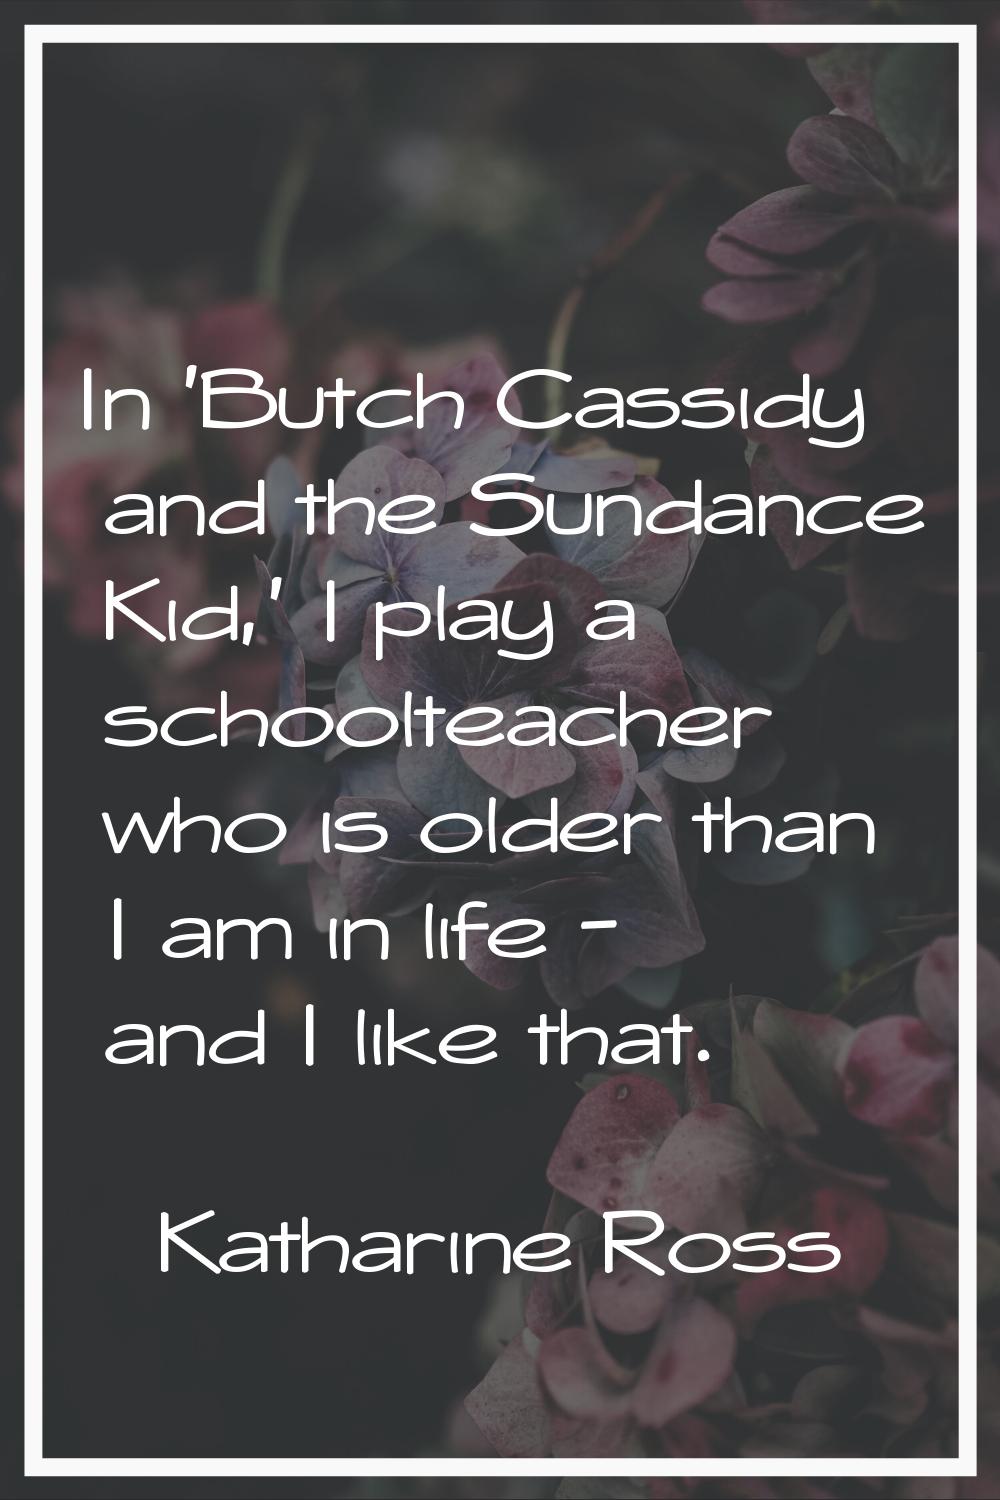 In 'Butch Cassidy and the Sundance Kid,' I play a schoolteacher who is older than I am in life - an